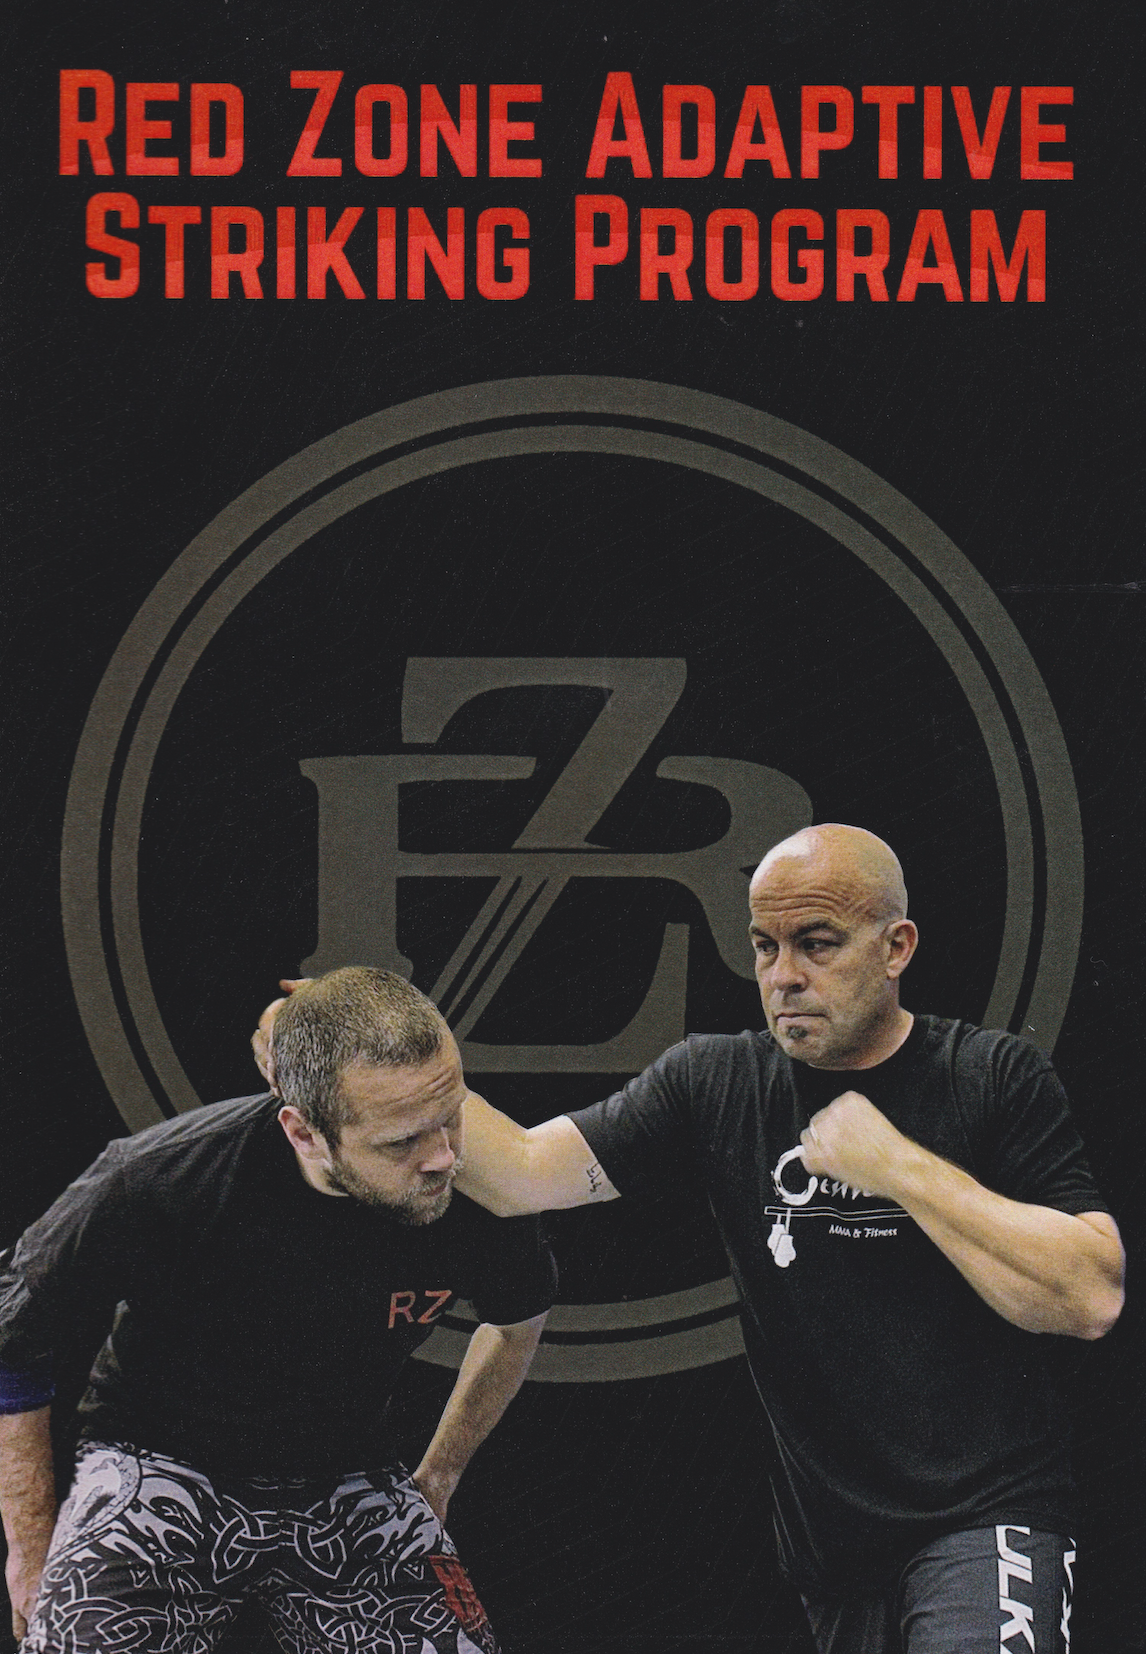 Red Zone Adaptive Striking 3 DVD Set by Jerry Wetzel (Preowned) - Budovideos Inc